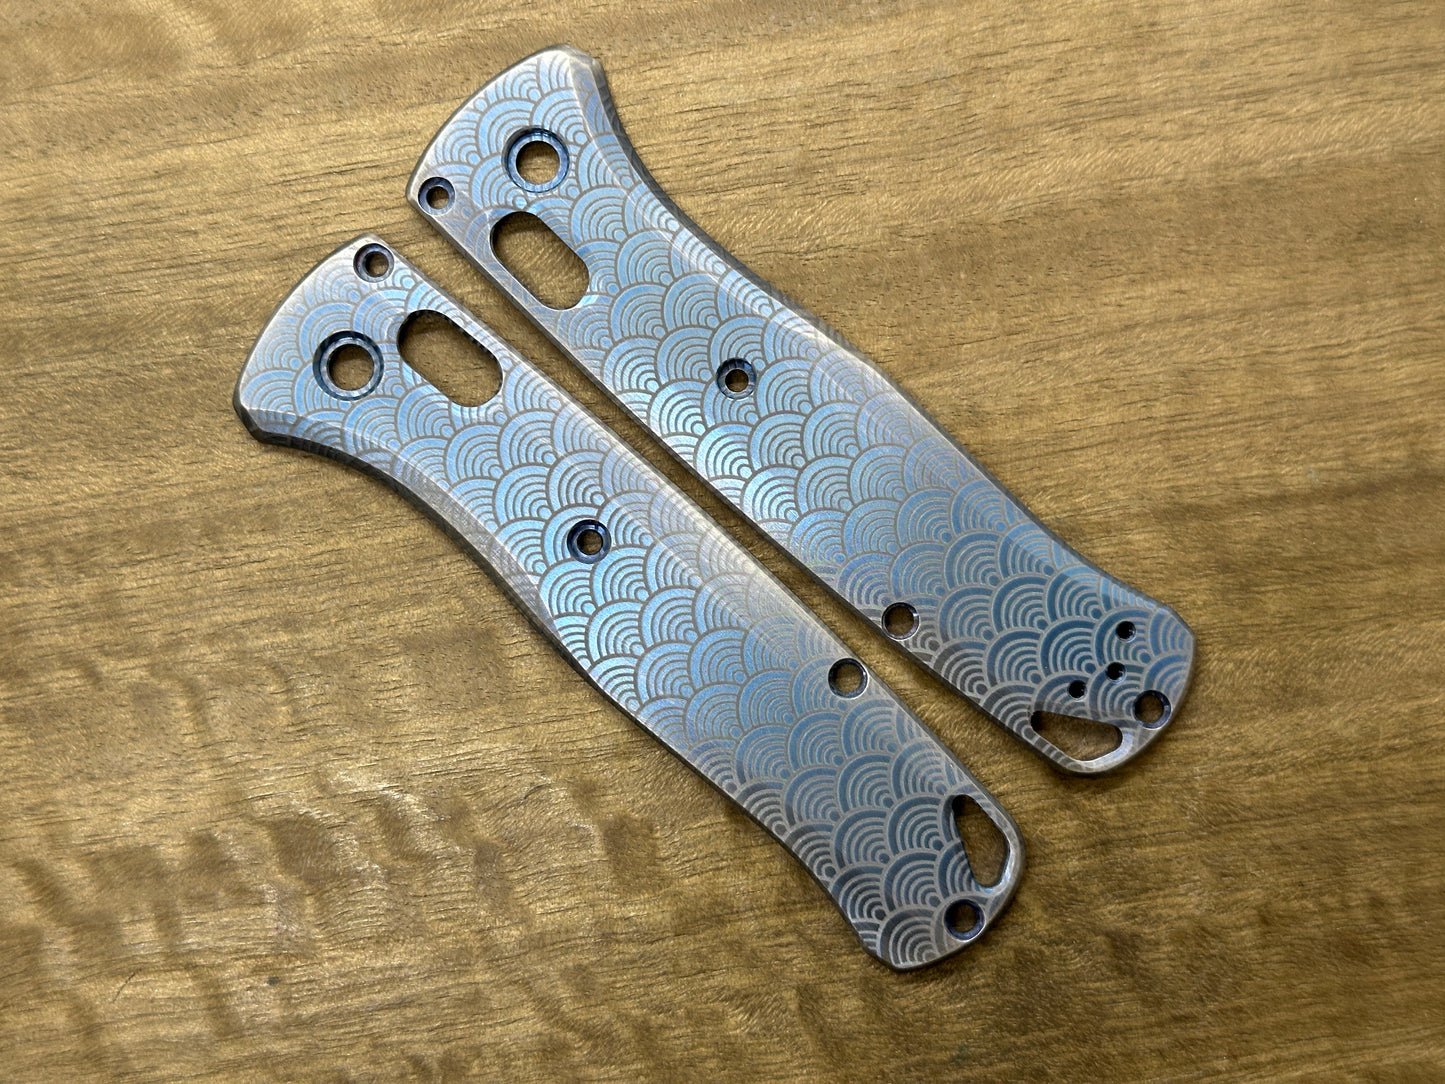 SEIGAIHA Blue Ano Brushed Titanium Scales for Benchmade Bugout 535